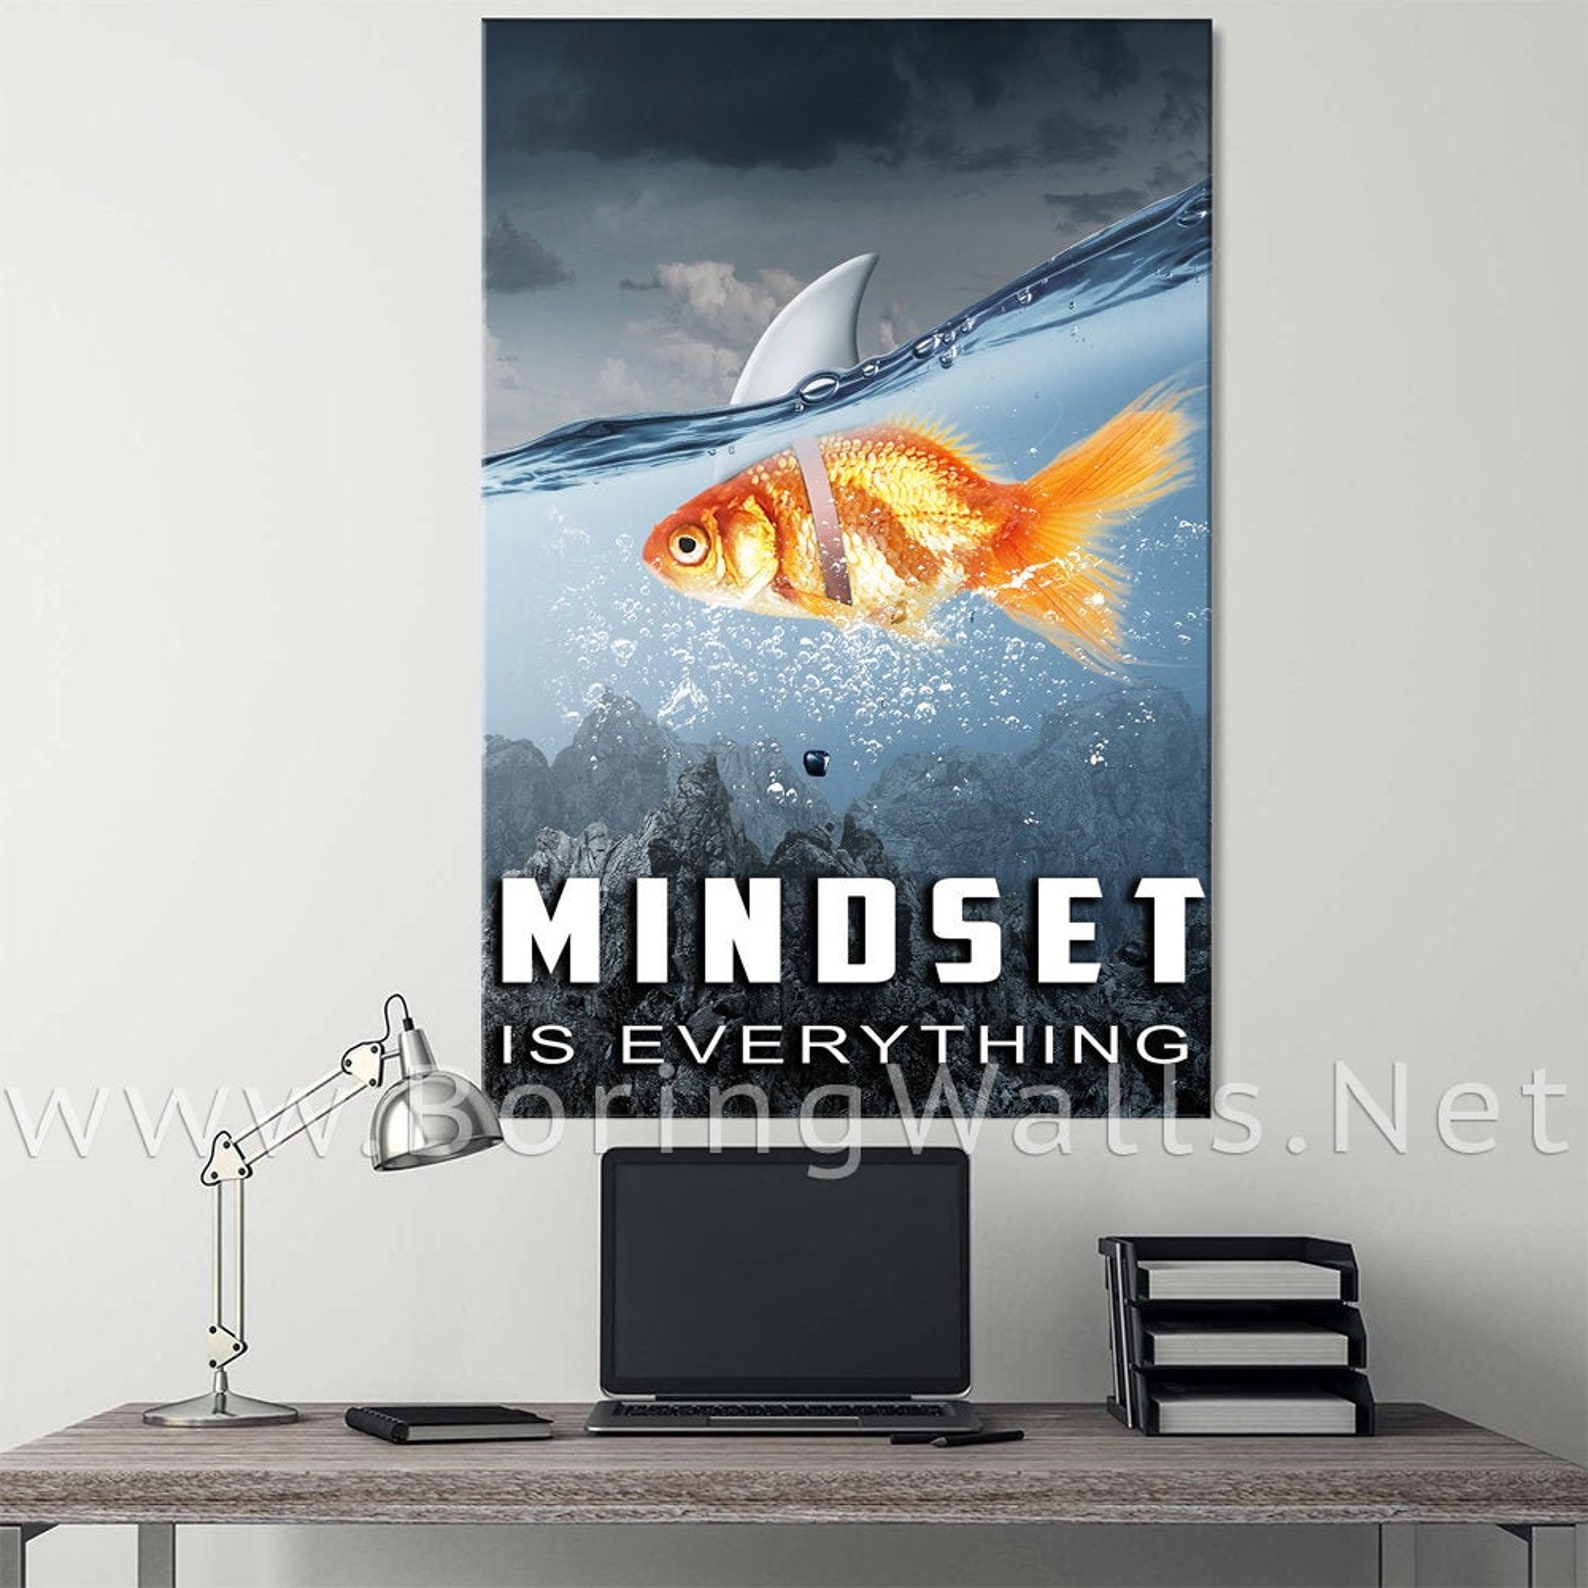 Mindset is everything Canvas Print Wall Art Office Decor | Etsy